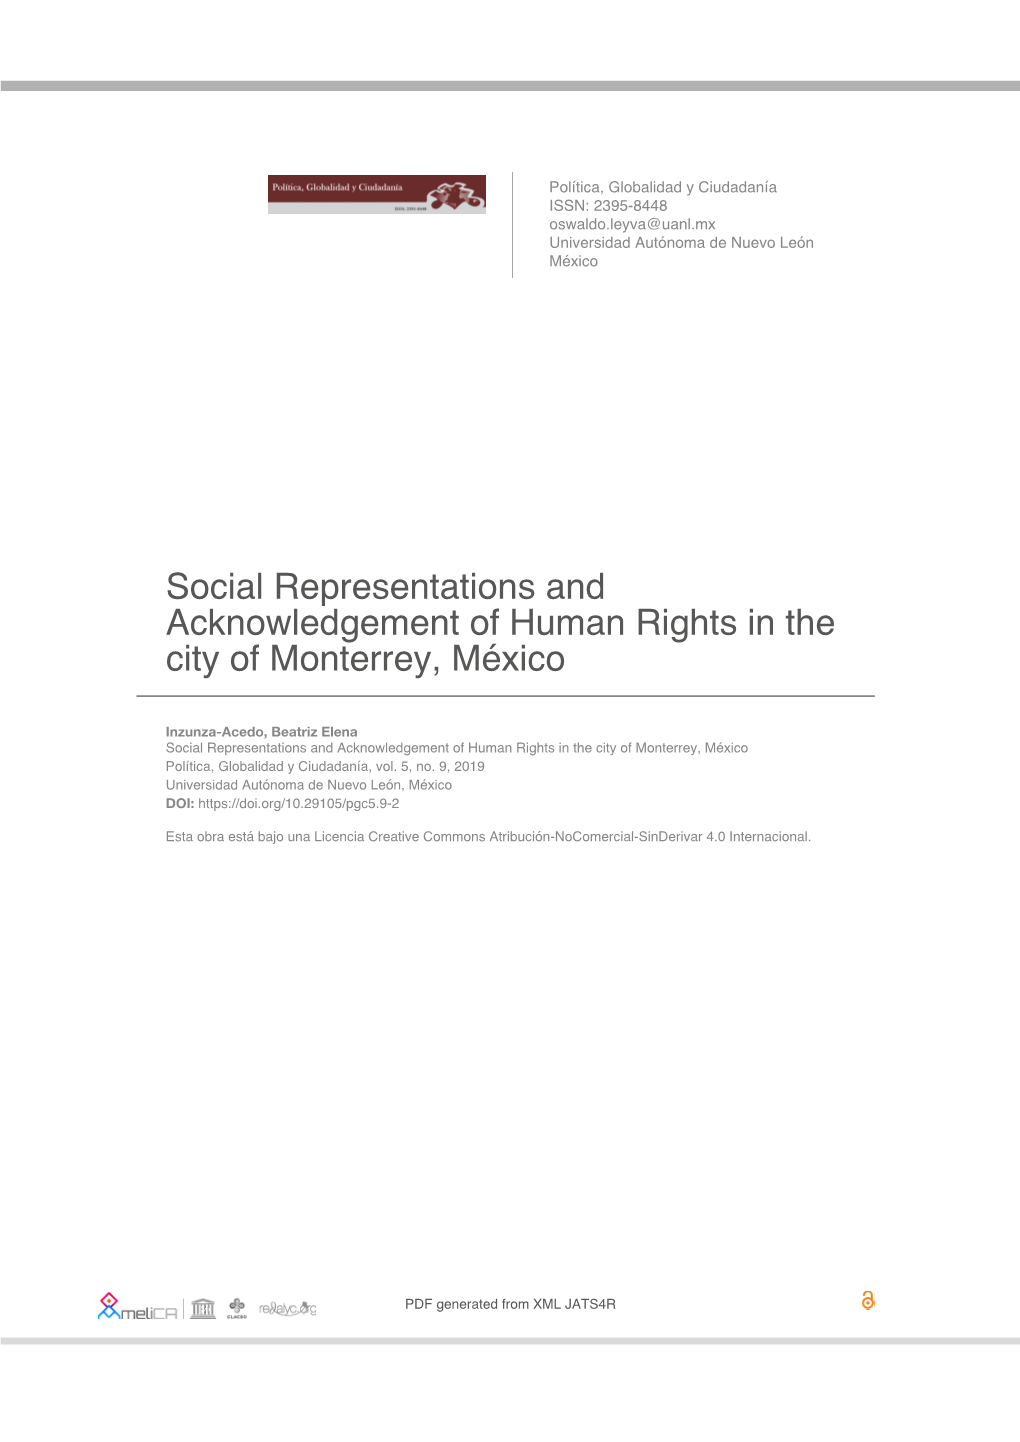 Social Representations and Acknowledgement of Human Rights in the City of Monterrey, México